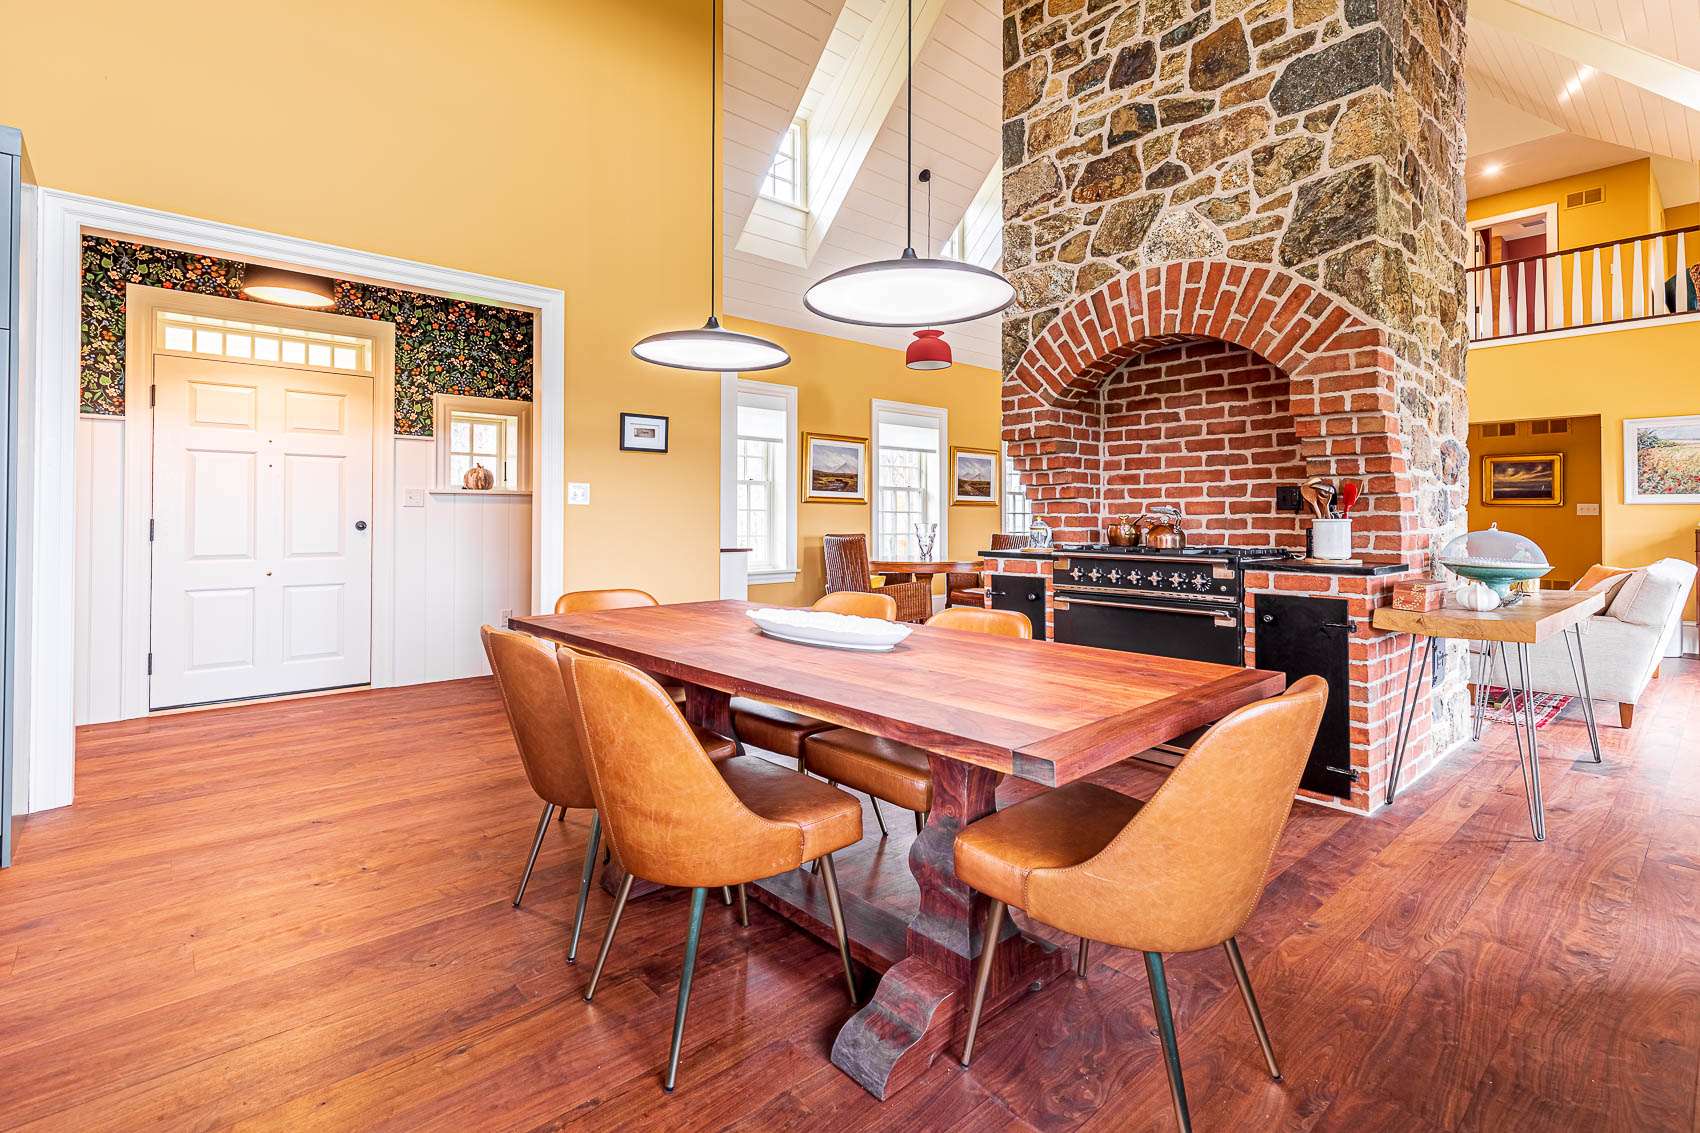 Dining room with stove built into fireplace in an olde bulltown home